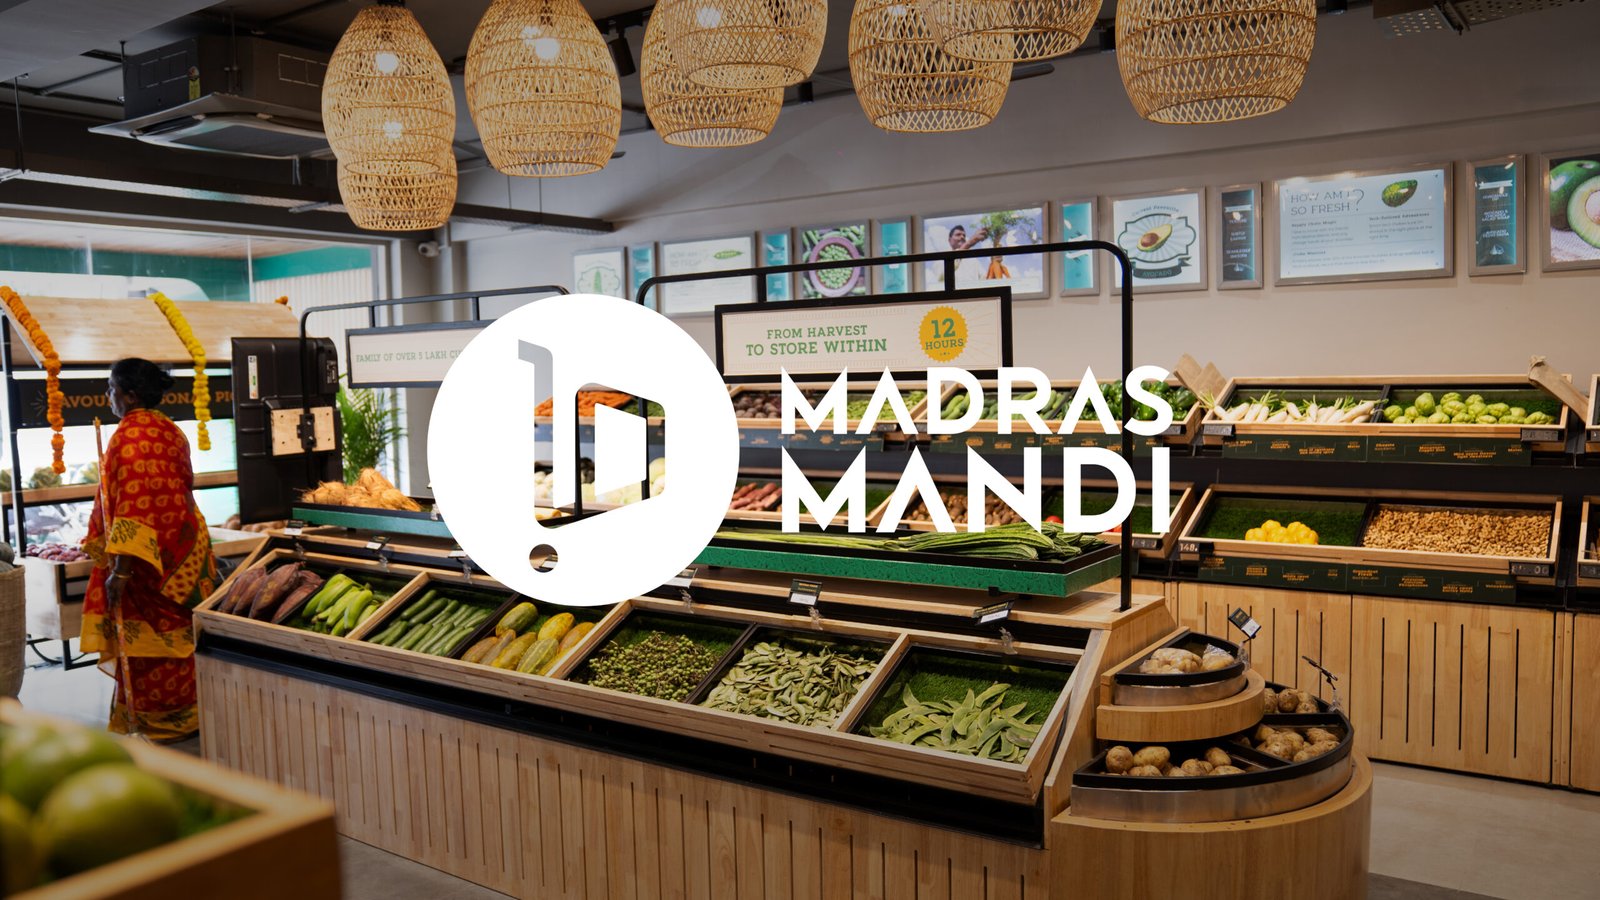 Madras Mandi announces expansion in Chennai with 20 new stores